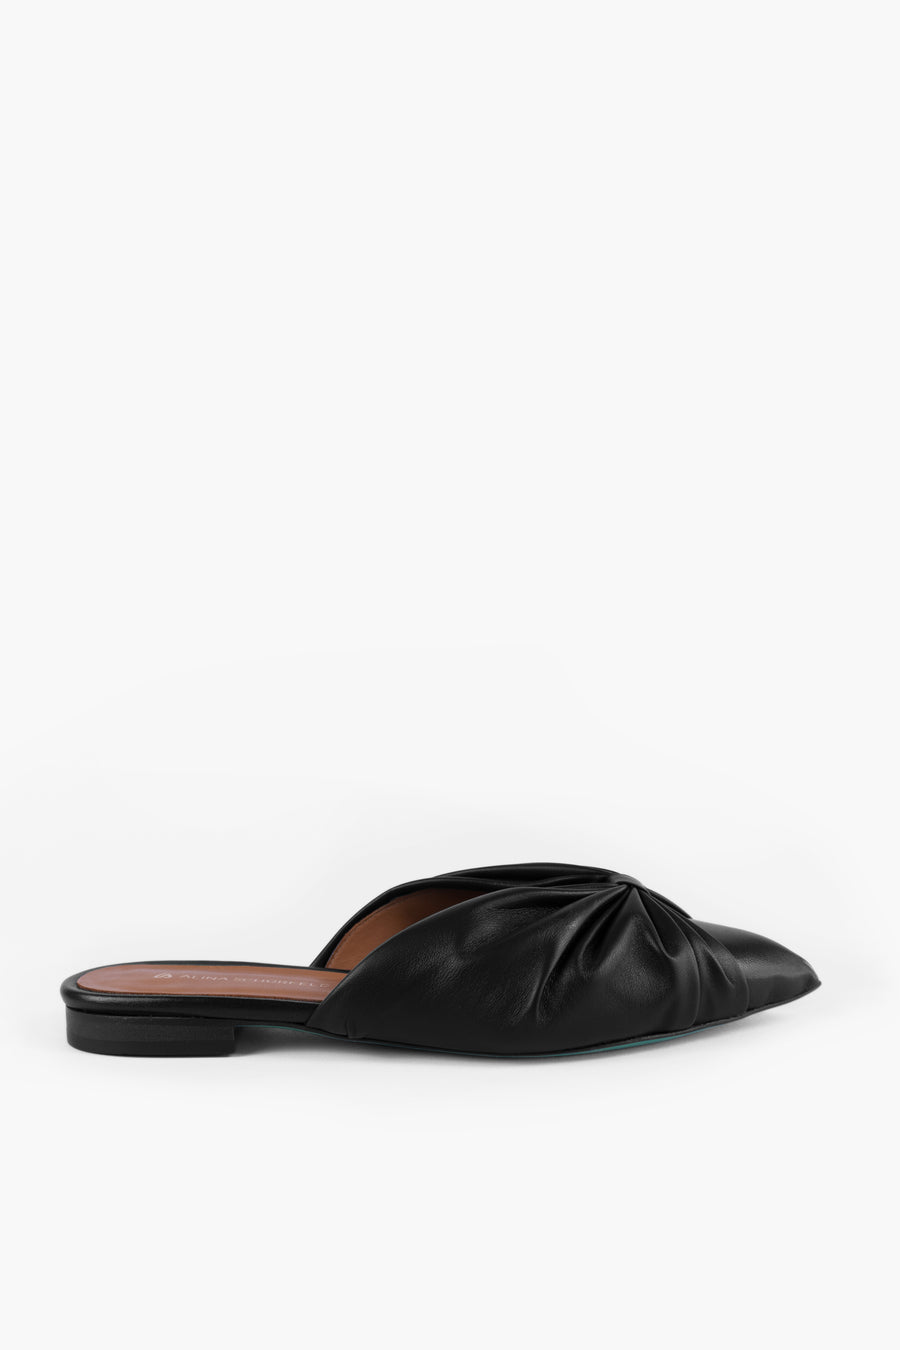 Sustainable, black coloured TILDA slippers with plissee, locally produced in Hamburg. Made from metal-free leather. Made in Germany by Alina Schürfeld.